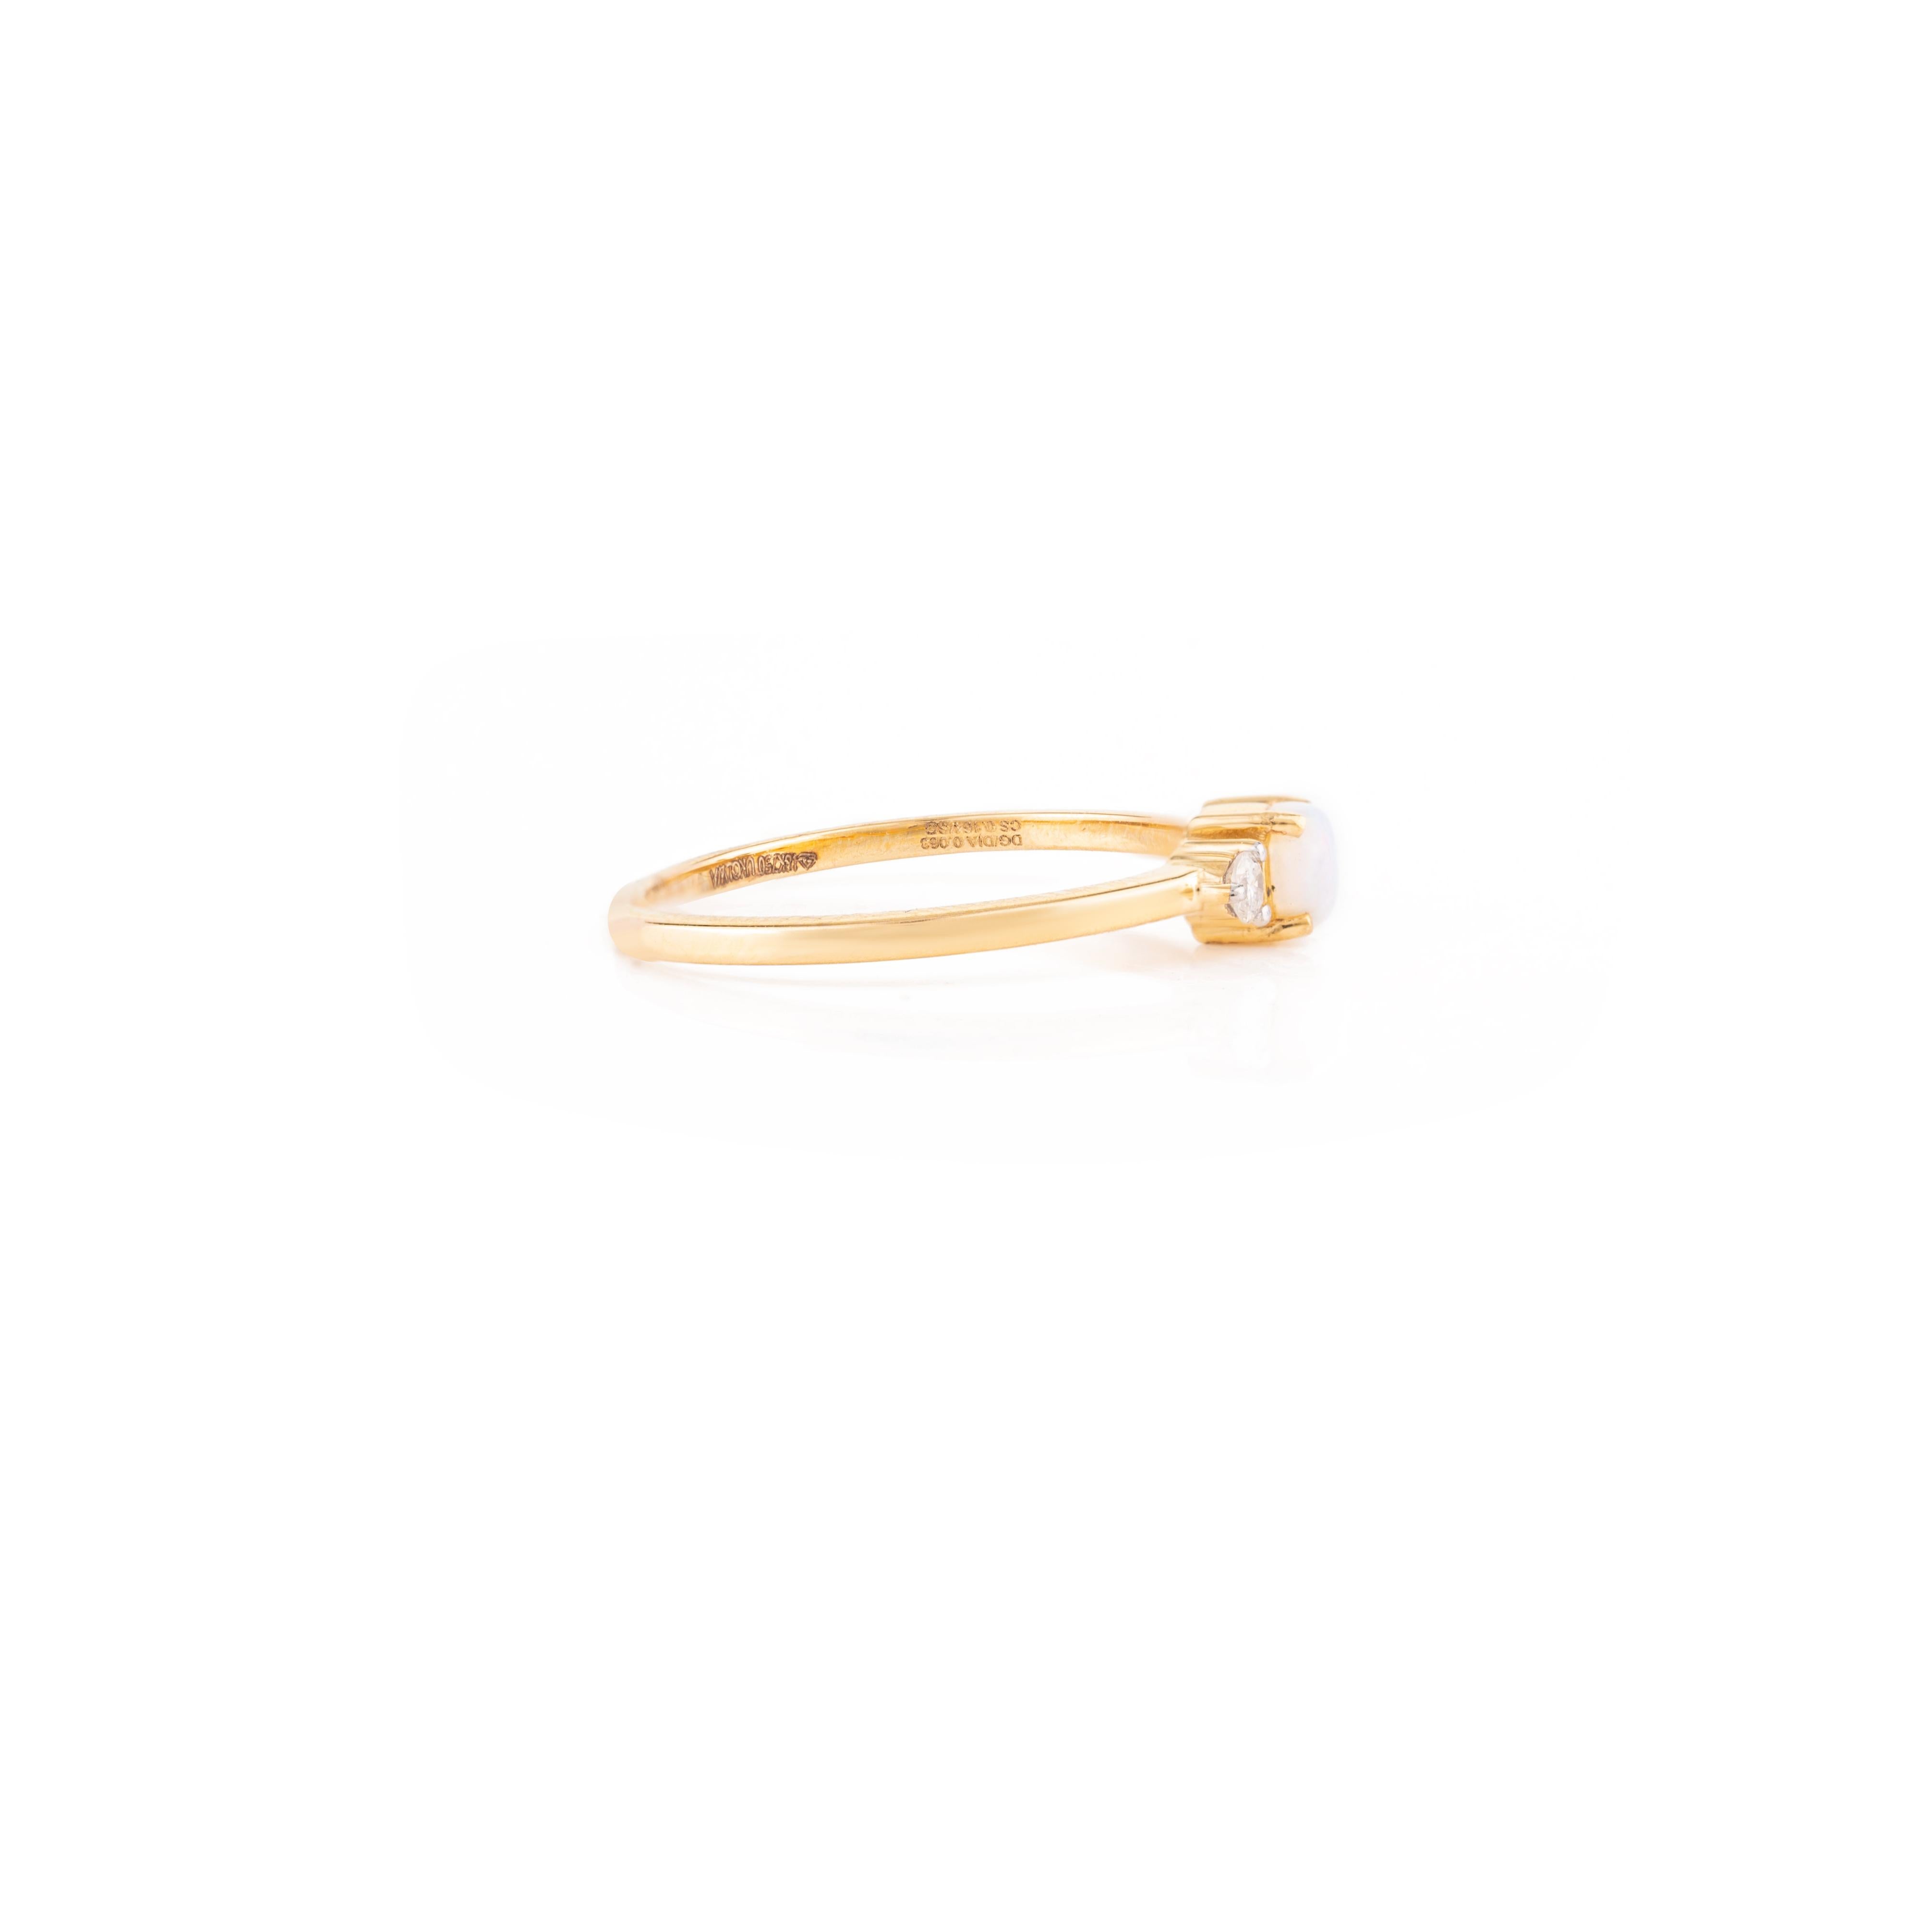 For Sale:  Minimal 18k Yellow Gold Opal Diamond Everyday Stackable Ring Gift 5